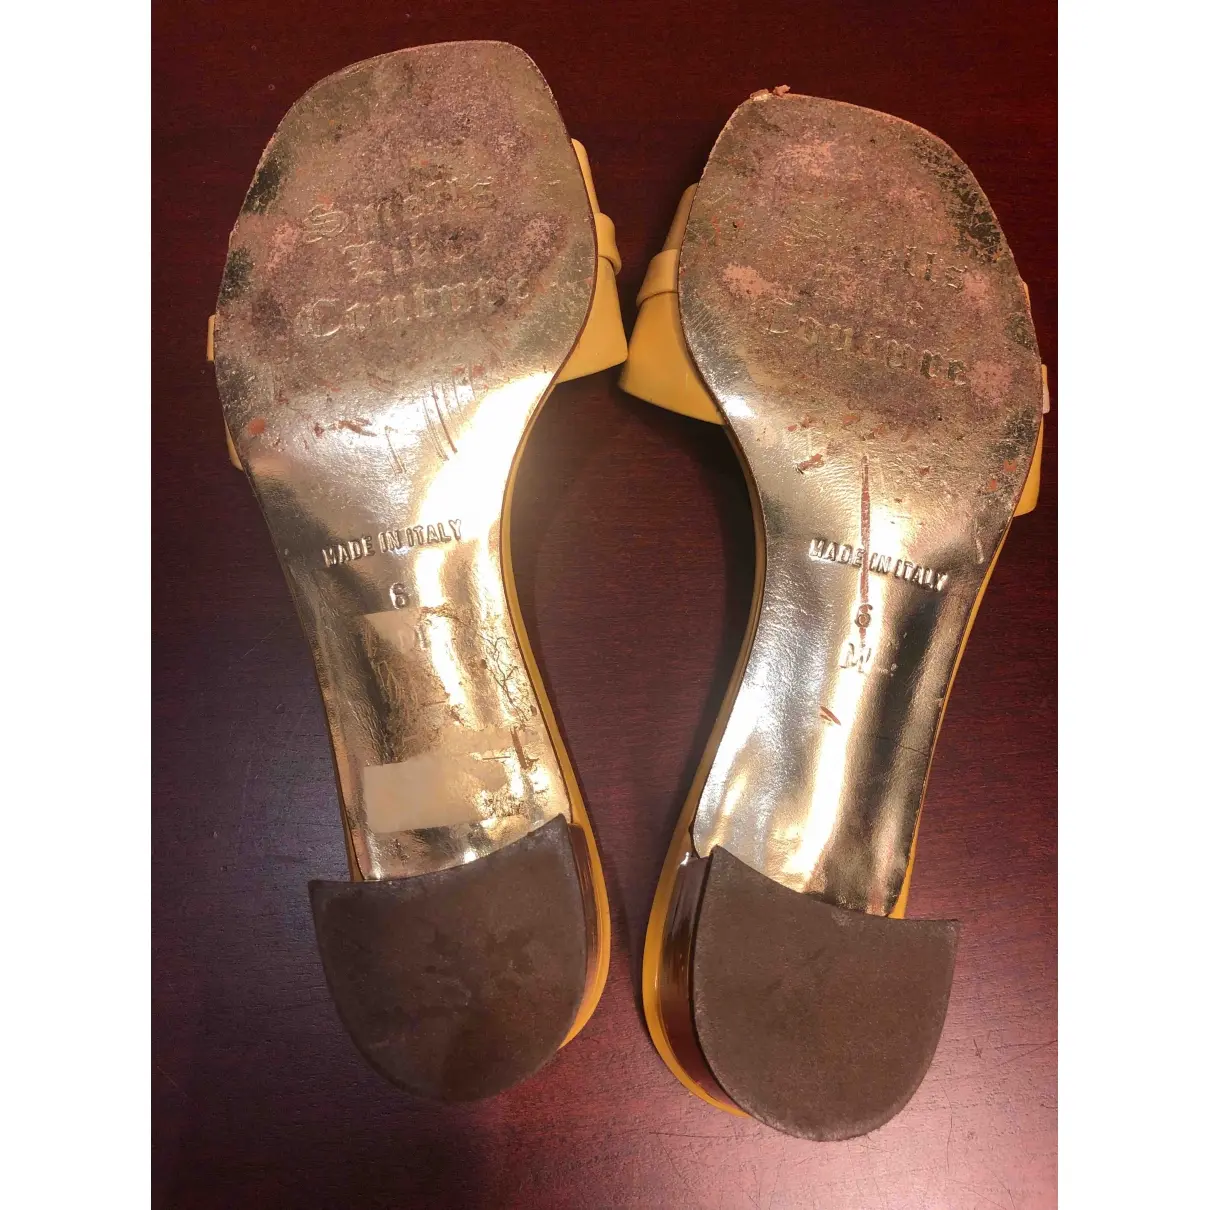 Buy Juicy Couture Leather sandal online